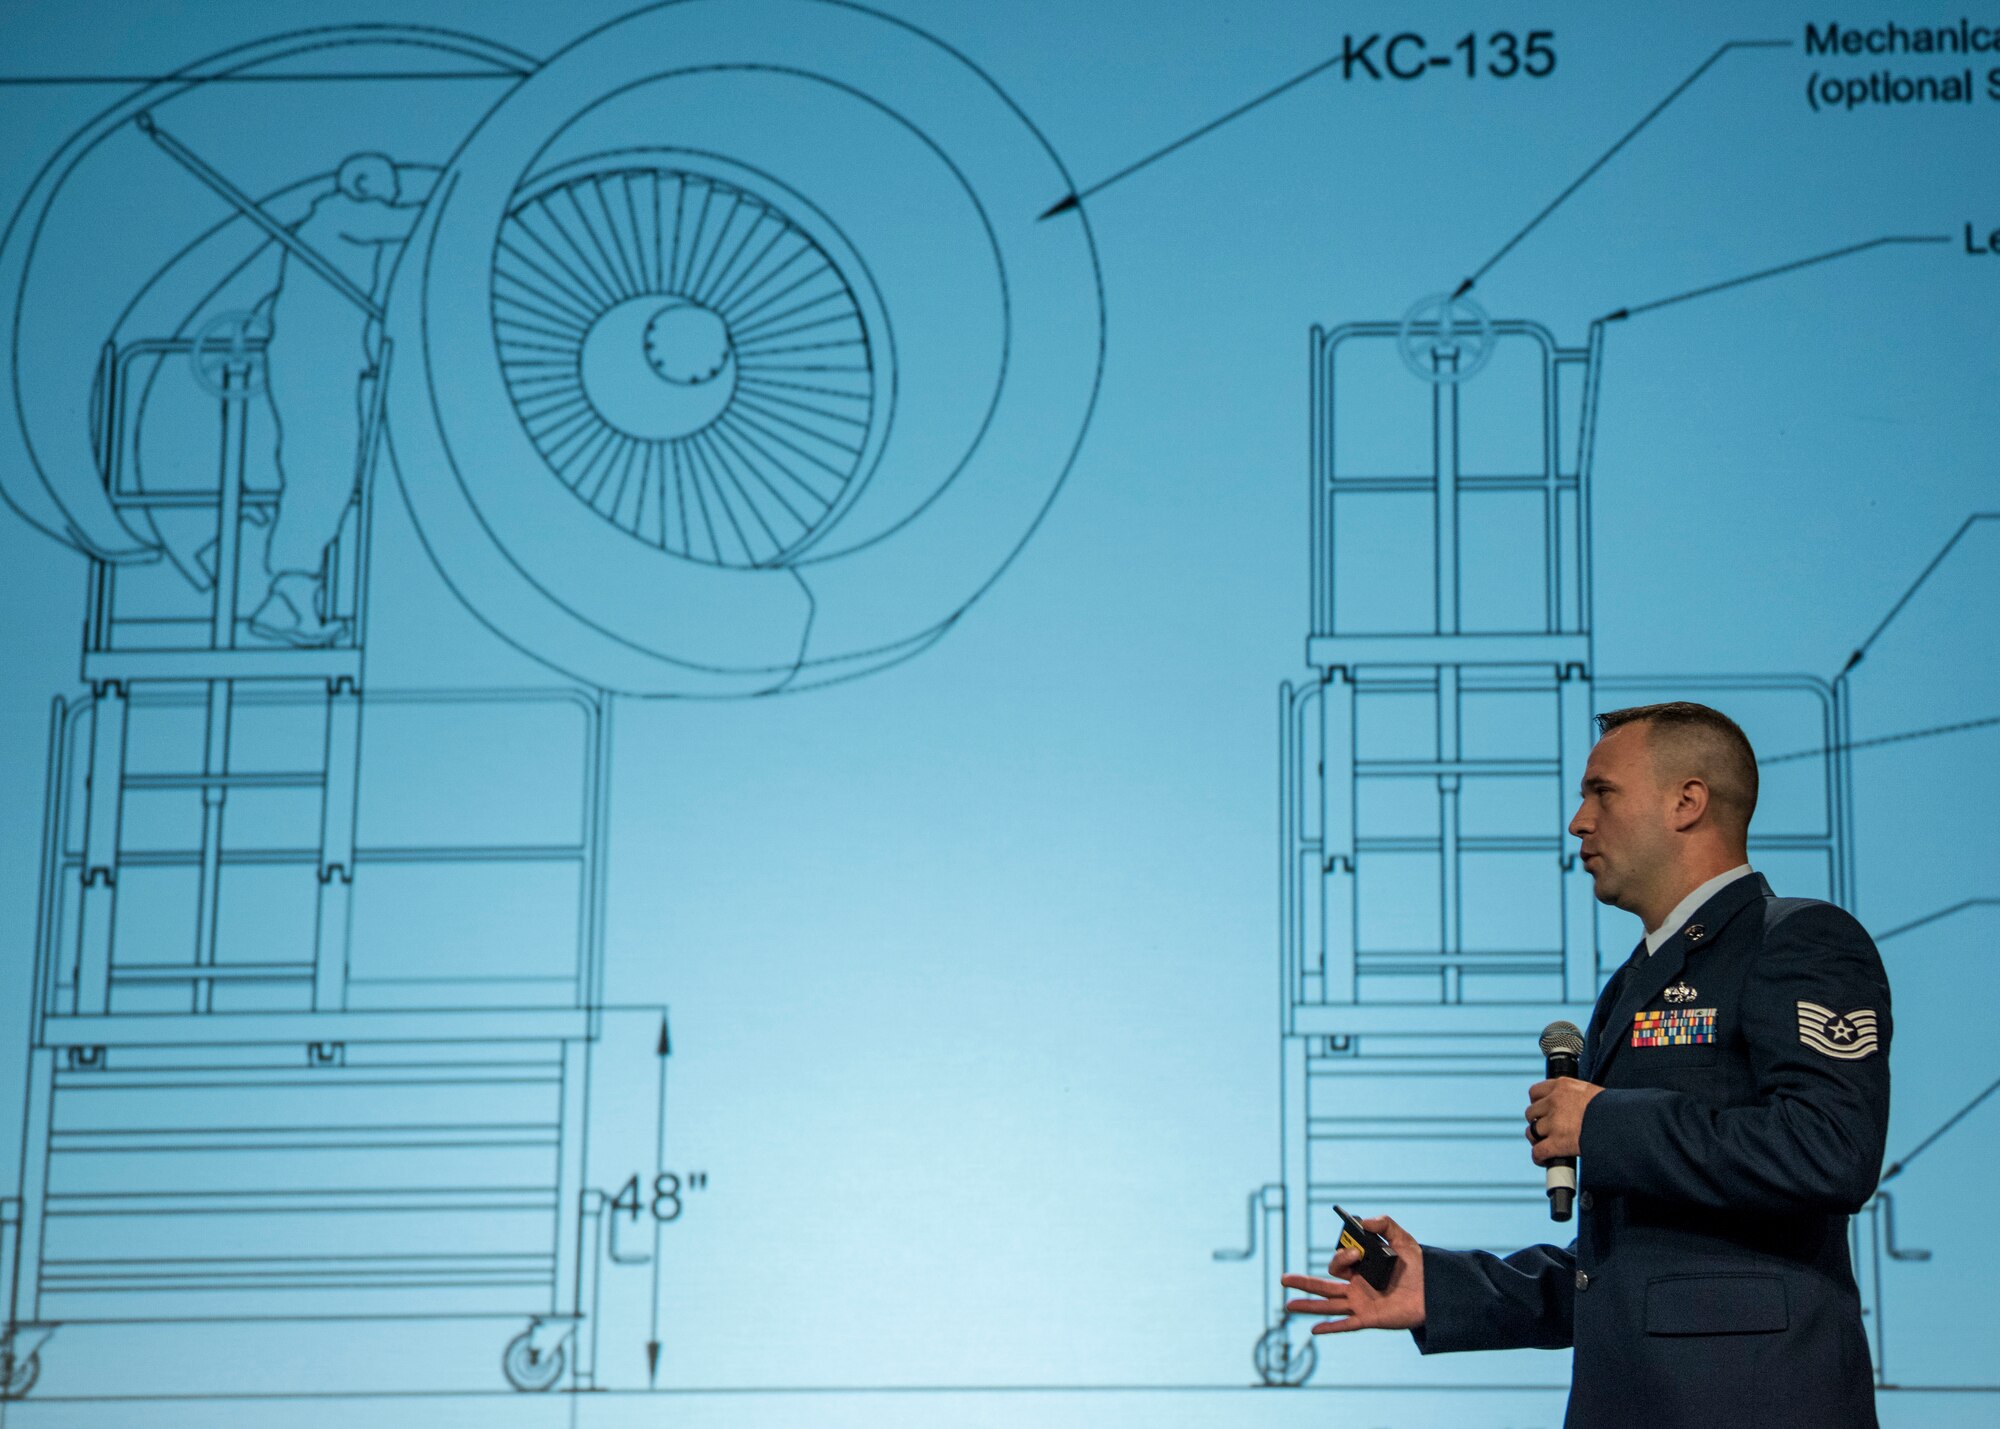 Tech. Sgt. Shawn Roberge from the 92nd Air Refueling Wing presents his design for a KC-135 Stratotanker engine-specific maintenance platform stand during the 2018 Air Mobility Command Phoenix Spark Tank competition, where four finalists pitched their innovation ideas to a panel of judges at the Airlift/Tanker Association Symposium in Grapevine, Texas, Oct. 27, 2018. A/TA,
AMC's premier professional development event, provides mobility Airmen an opportunity to learn about and discuss mobility priorities, issues, challenges, and successes. The venue creates dialogue between industry experts and Air Force and Department of Defense about ways to innovate, enhance mission effects and advance readiness headed into the future. (U.S. Air Force photo by Tech. Sgt. Jodi
Martinez)